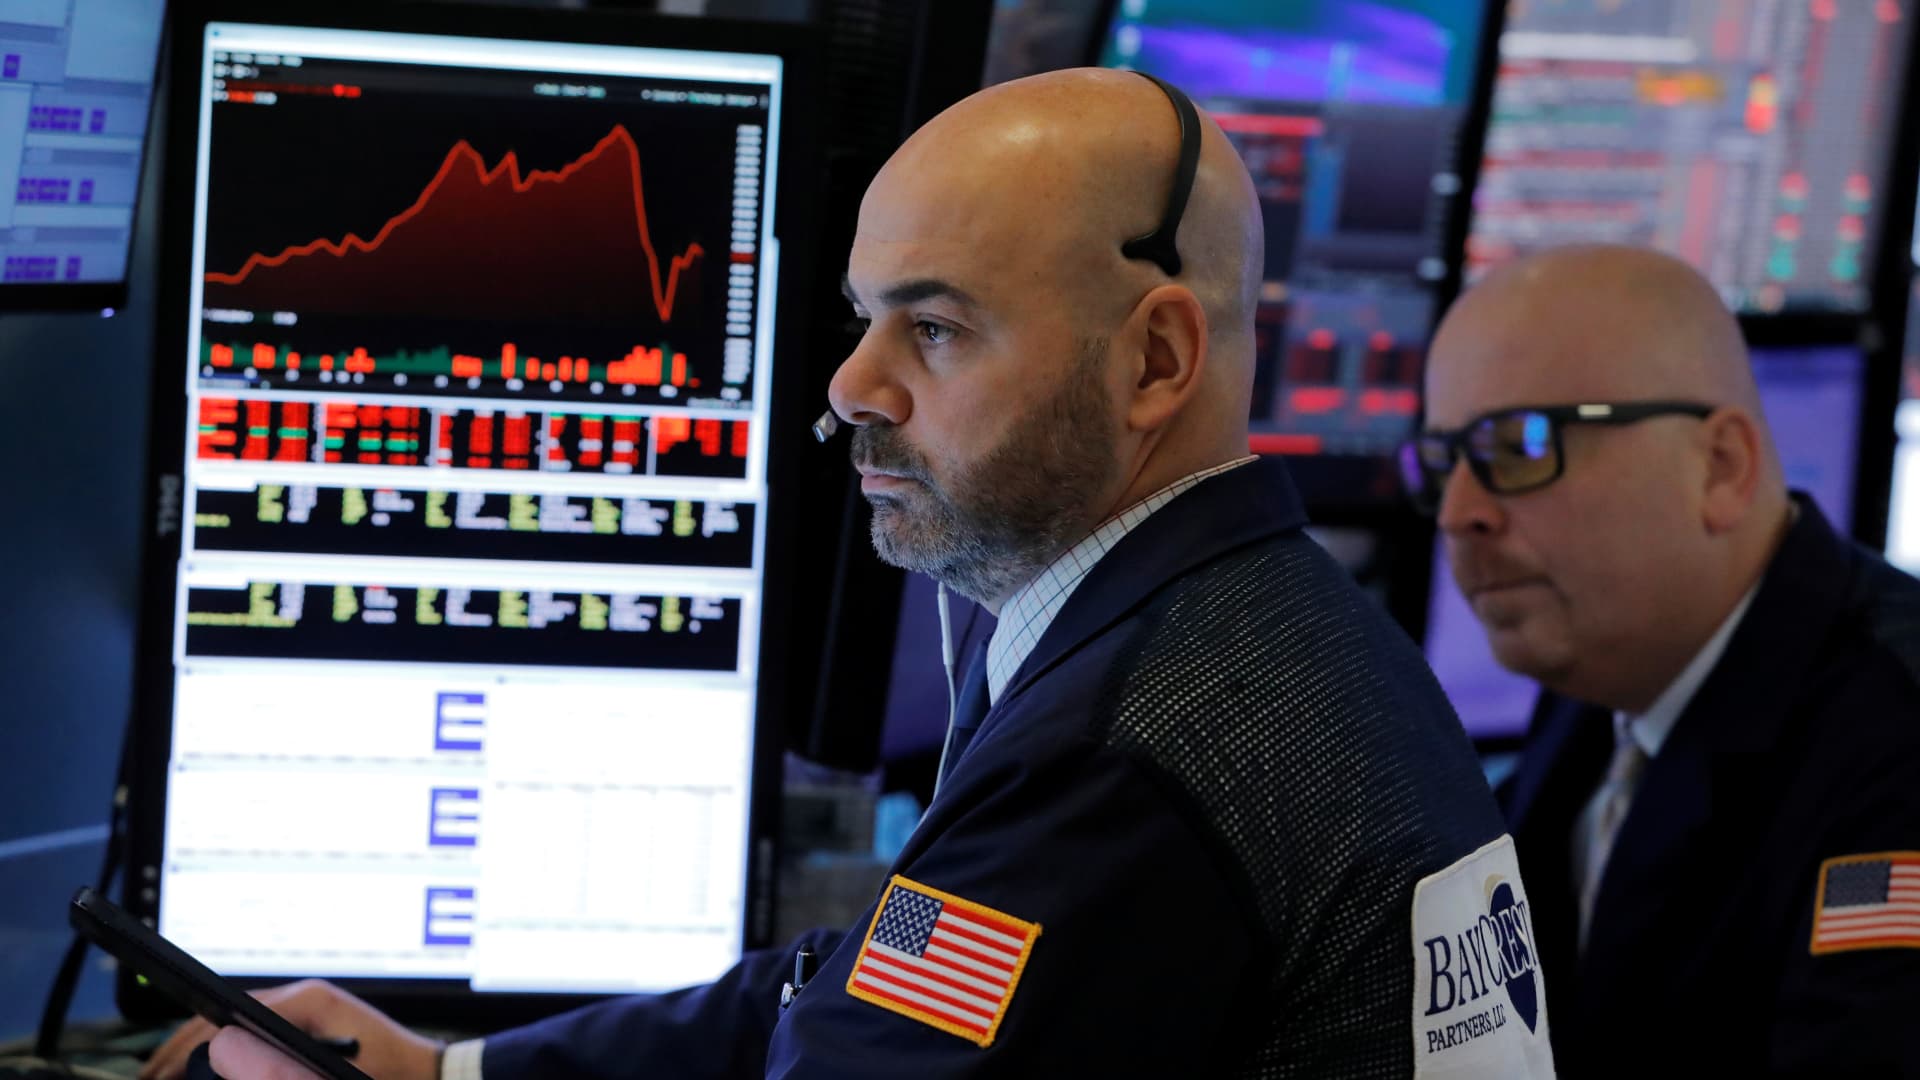 Recession will hit in first part 2023, the Dow is headed decrease: CFOs